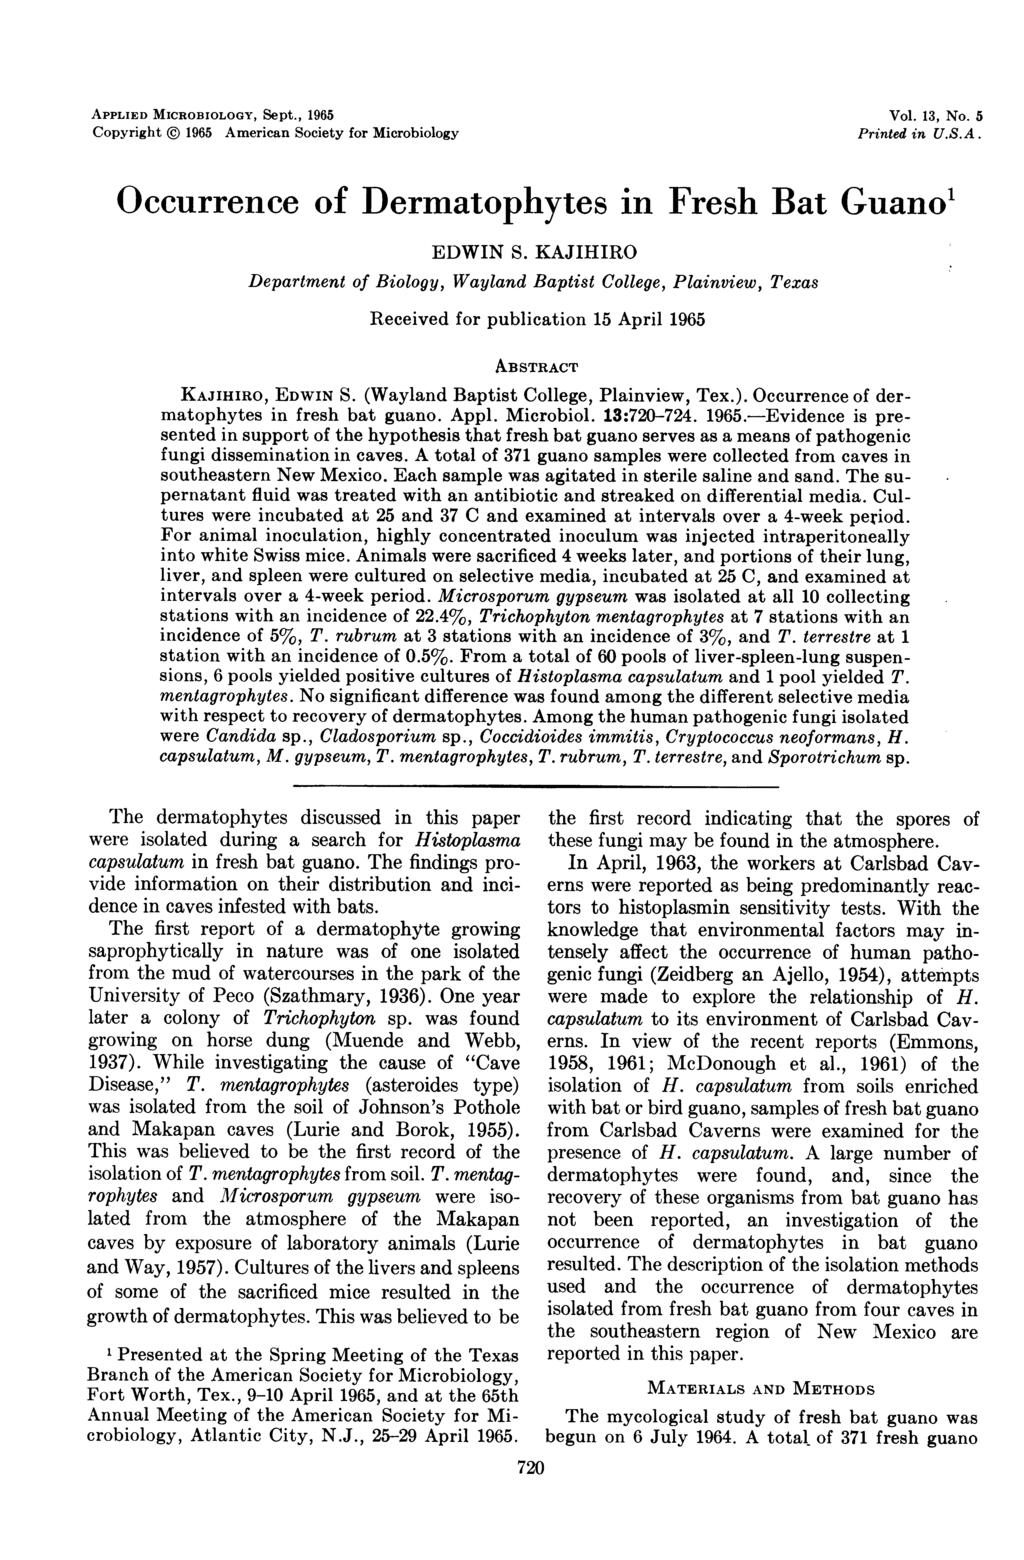 APPLIED MICROBIOLOGY, Sept., 1965 Copyright ) 1965 American Society for Microbiology Vol. 13, No. 5 Printed in U.S.A. Occurrence of Dermatophytes in Fresh Bat Guano1 EDWIN S.